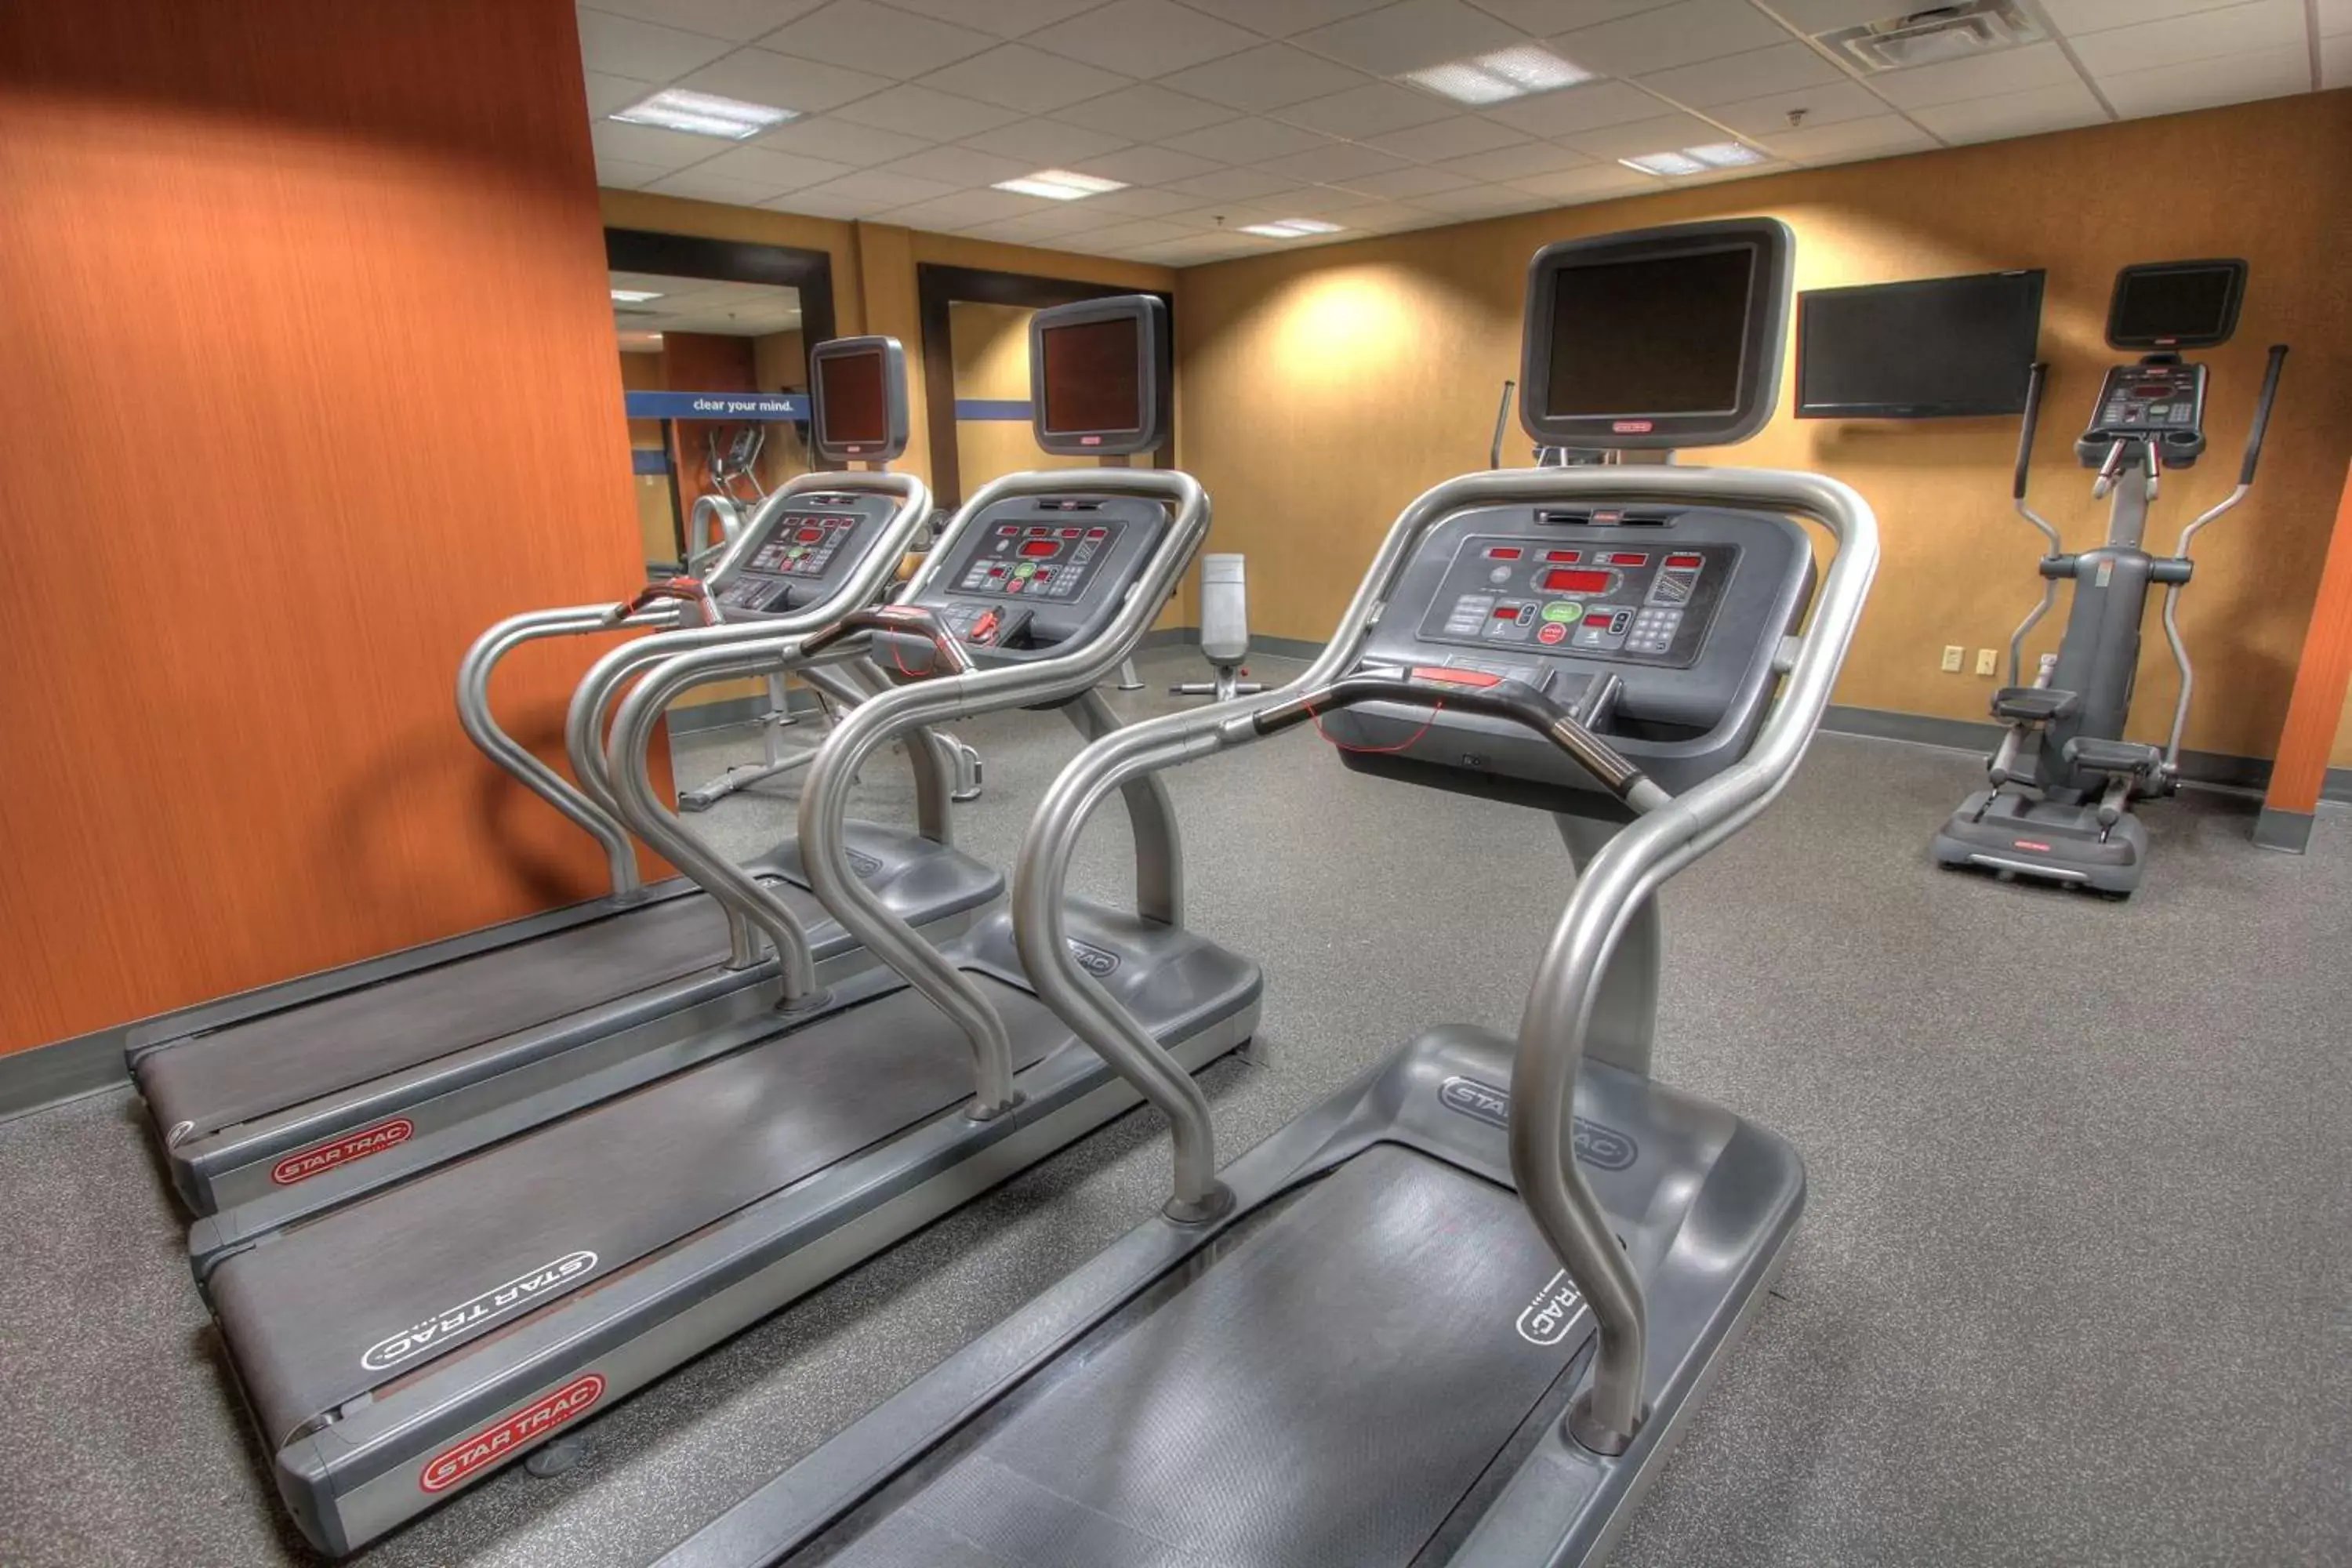 Fitness centre/facilities, Fitness Center/Facilities in Hampton Inn Pigeon Forge